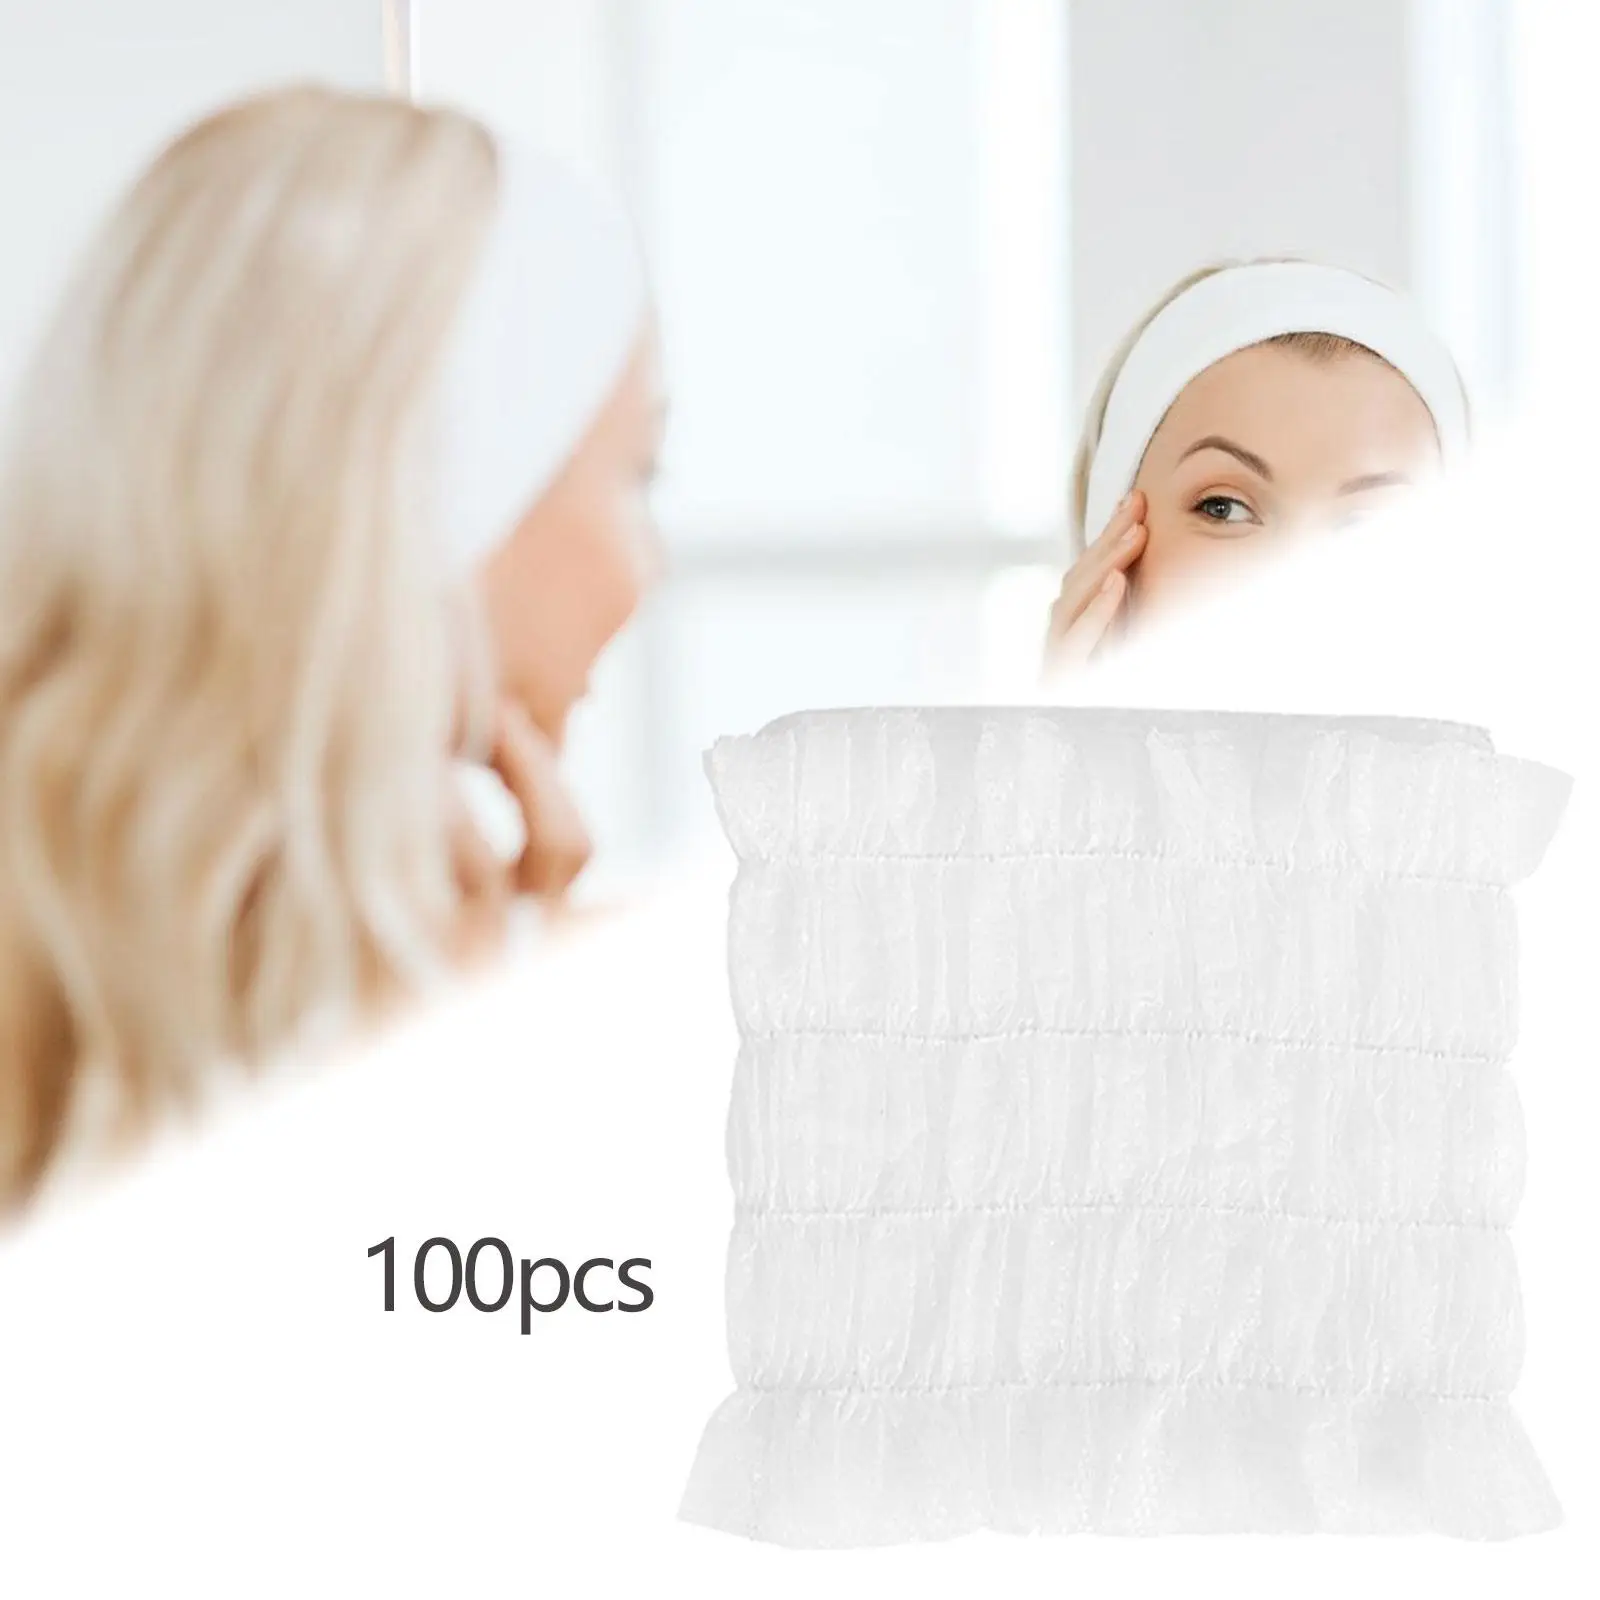 100 Pieces Nonwoven Hair Tie Womens Head Scarves Headwrap Beauty Headbands Hair Hoop for Bath Shower Party Makeup Hospital Girls